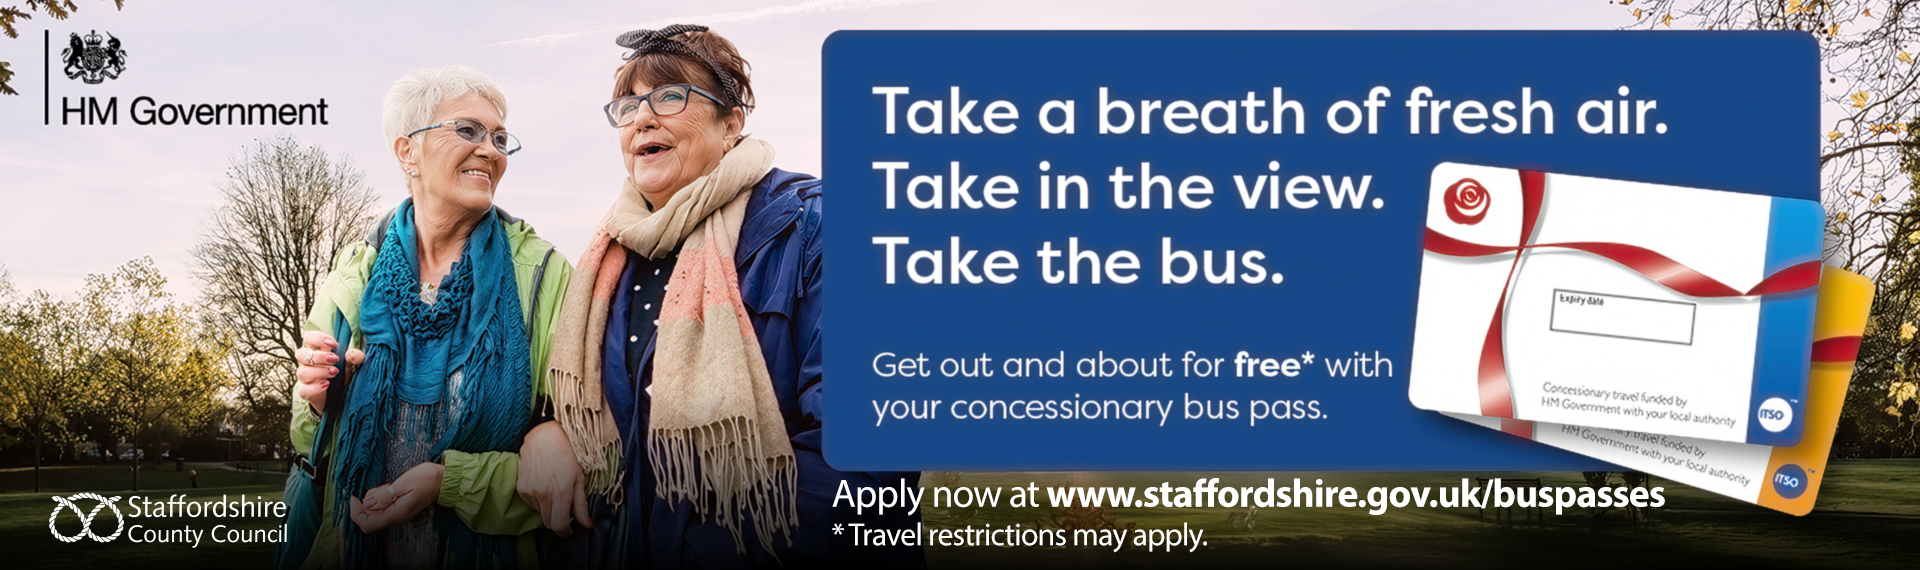 Get out and about on the bus for free with your concessionary bus pas